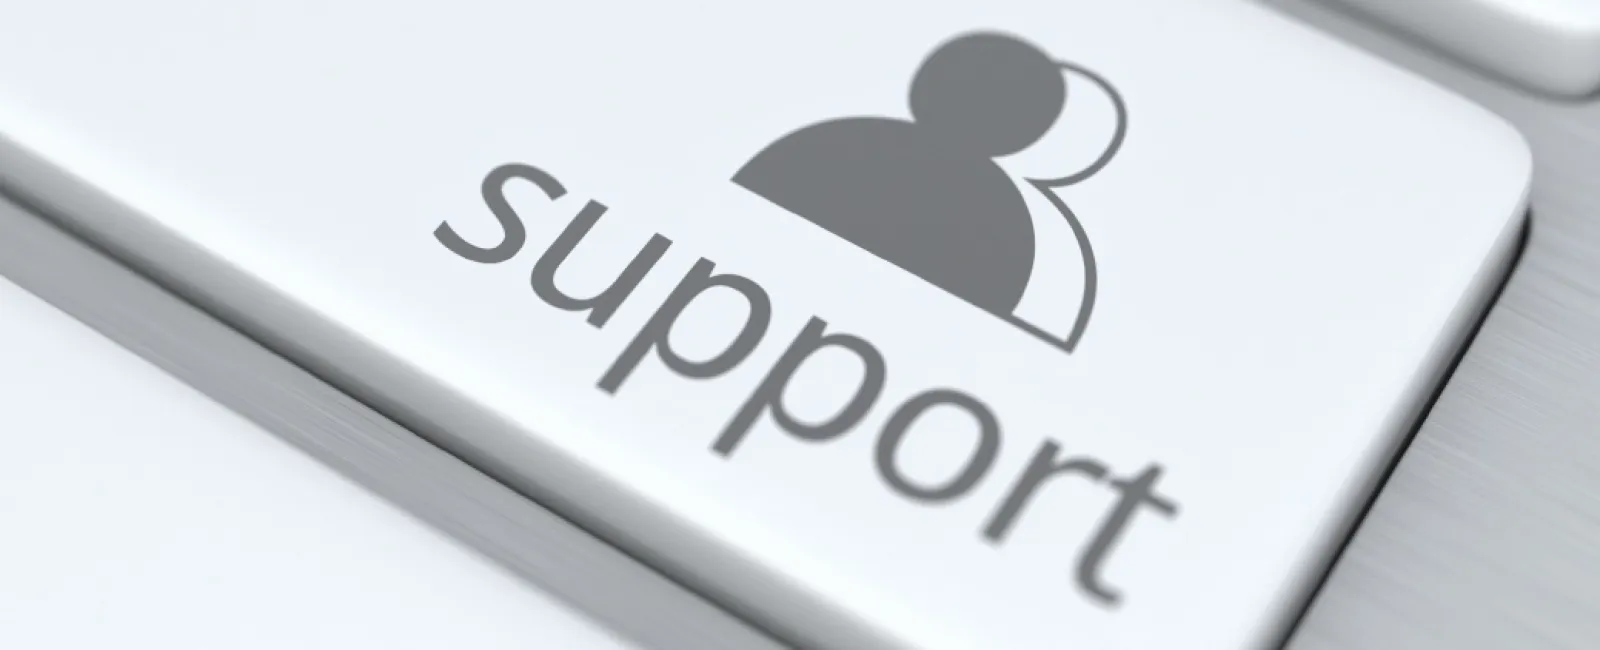 Technical Support At Your Fingertips